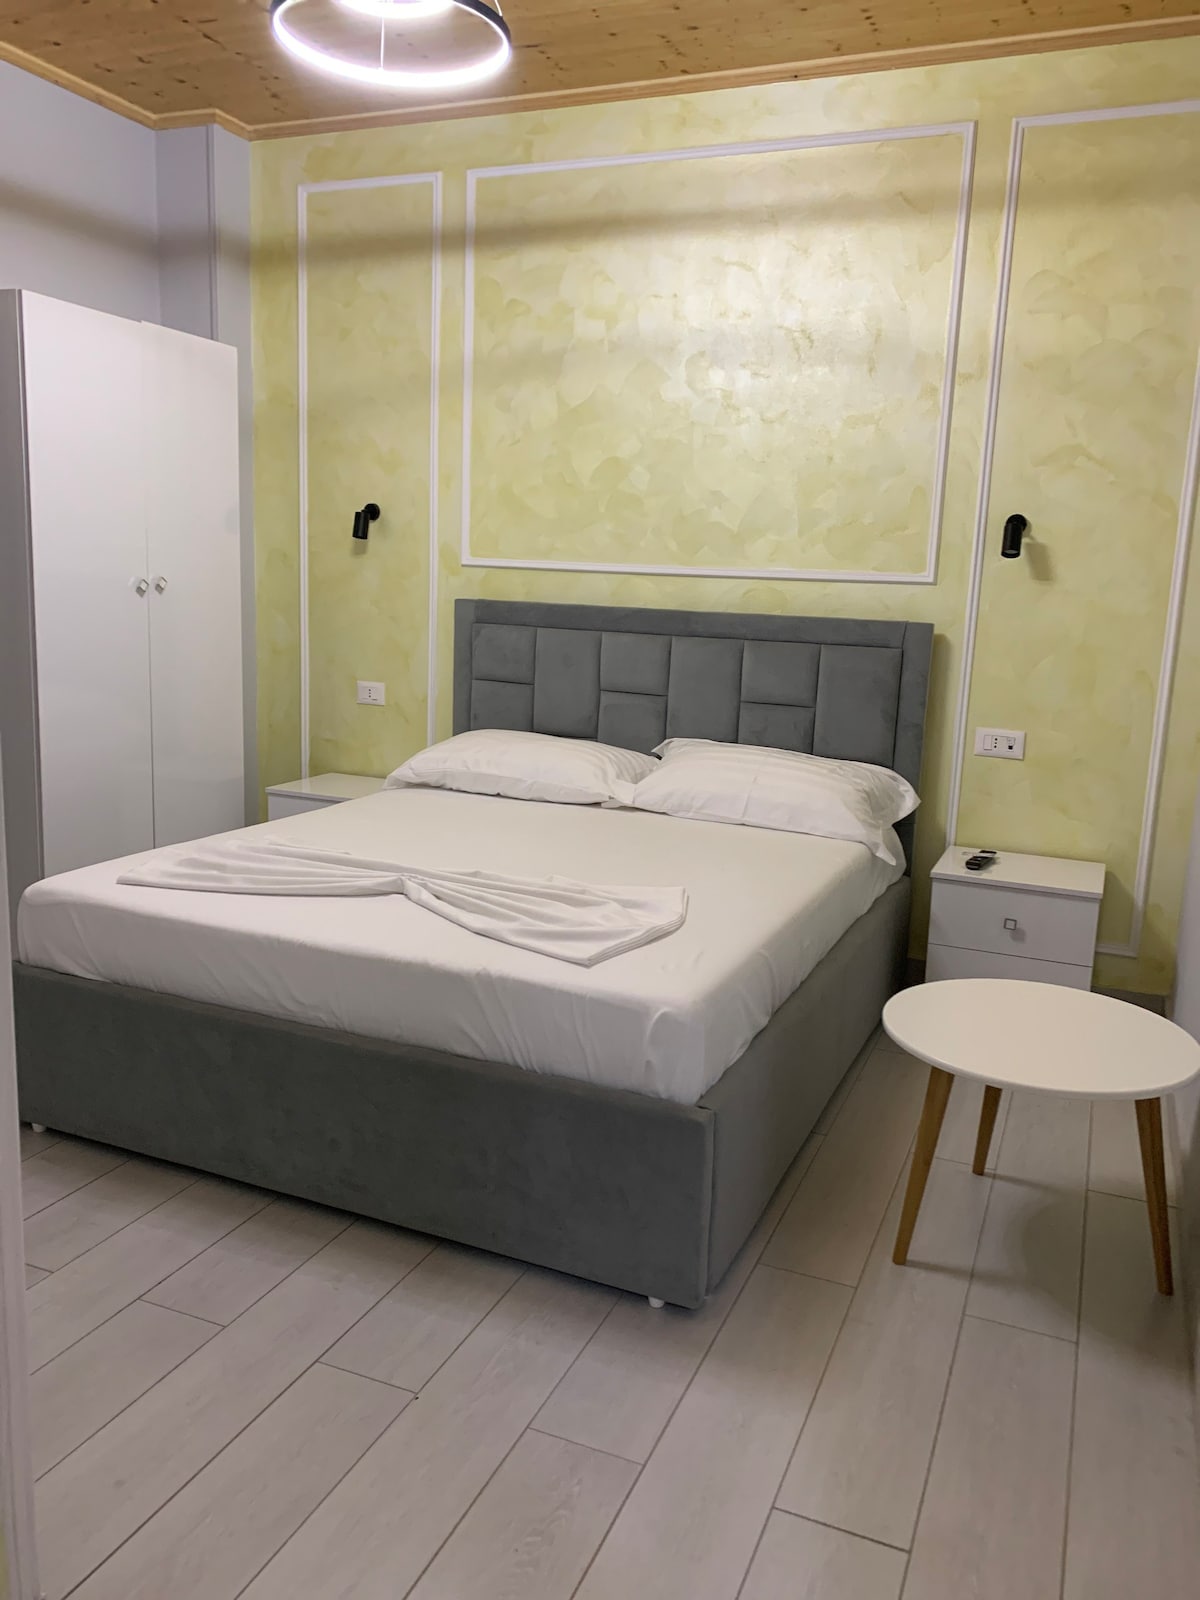 Rooms Mondi waits for you!